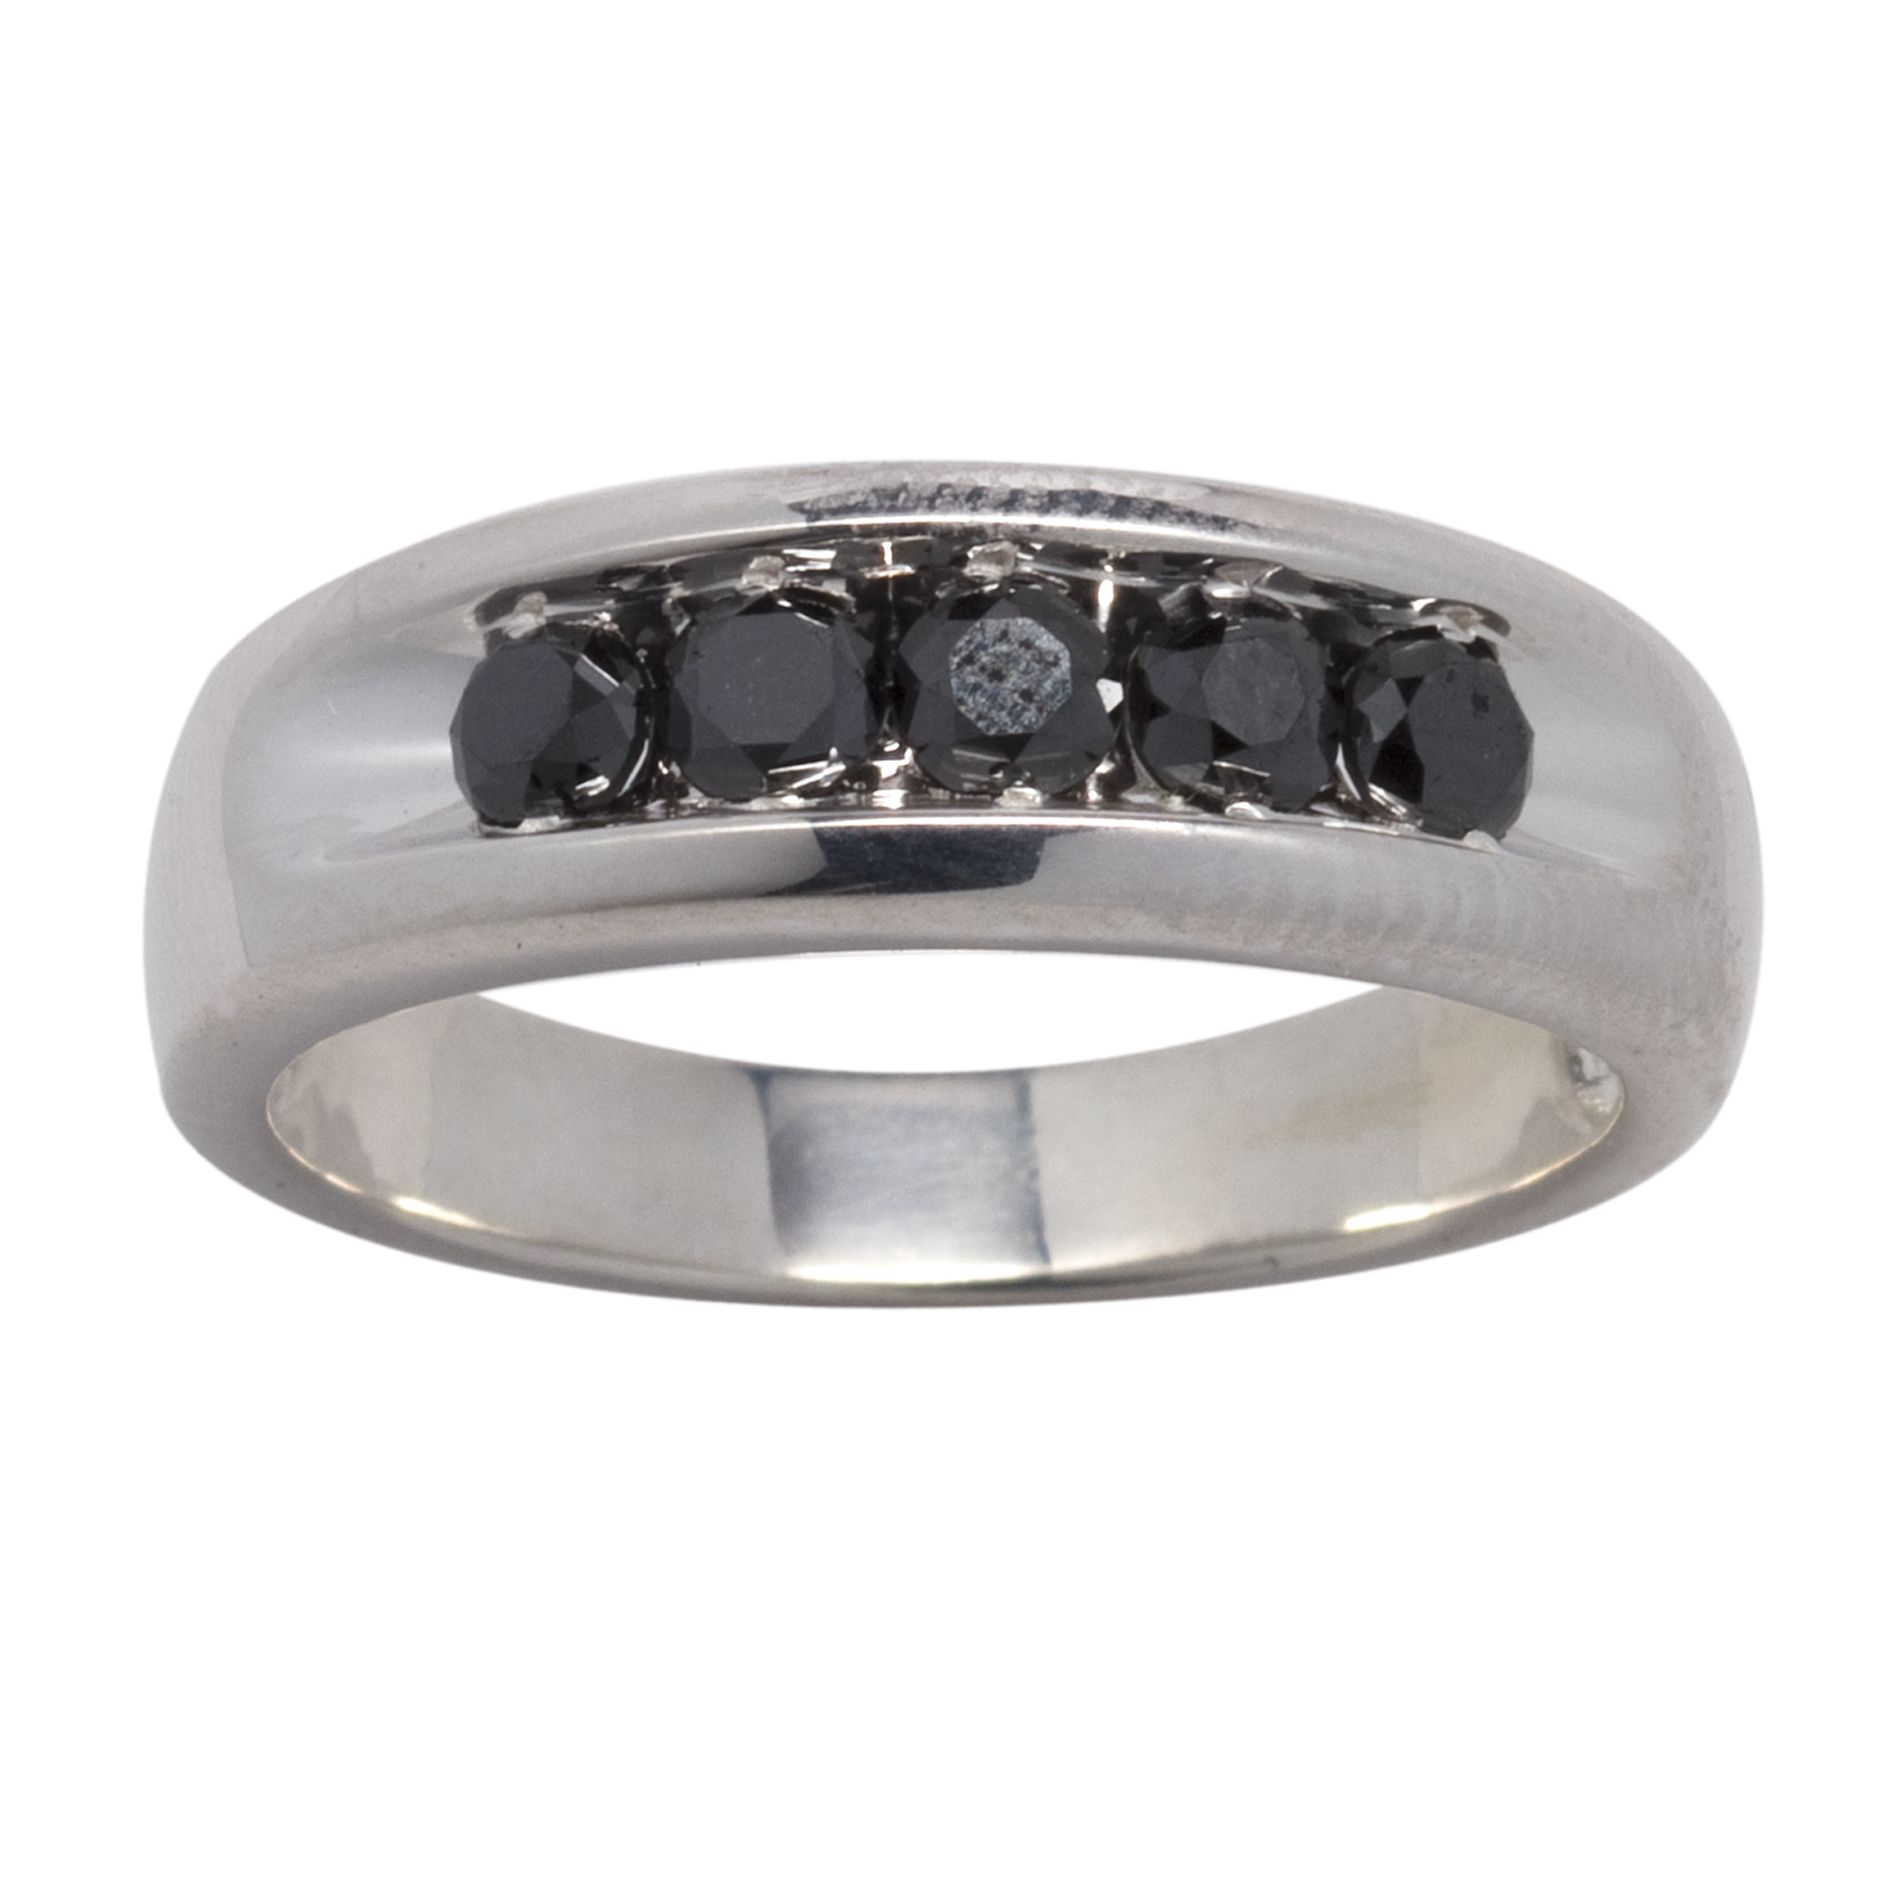 Gents 1cttw Black Diamond Ring Sterling Silver